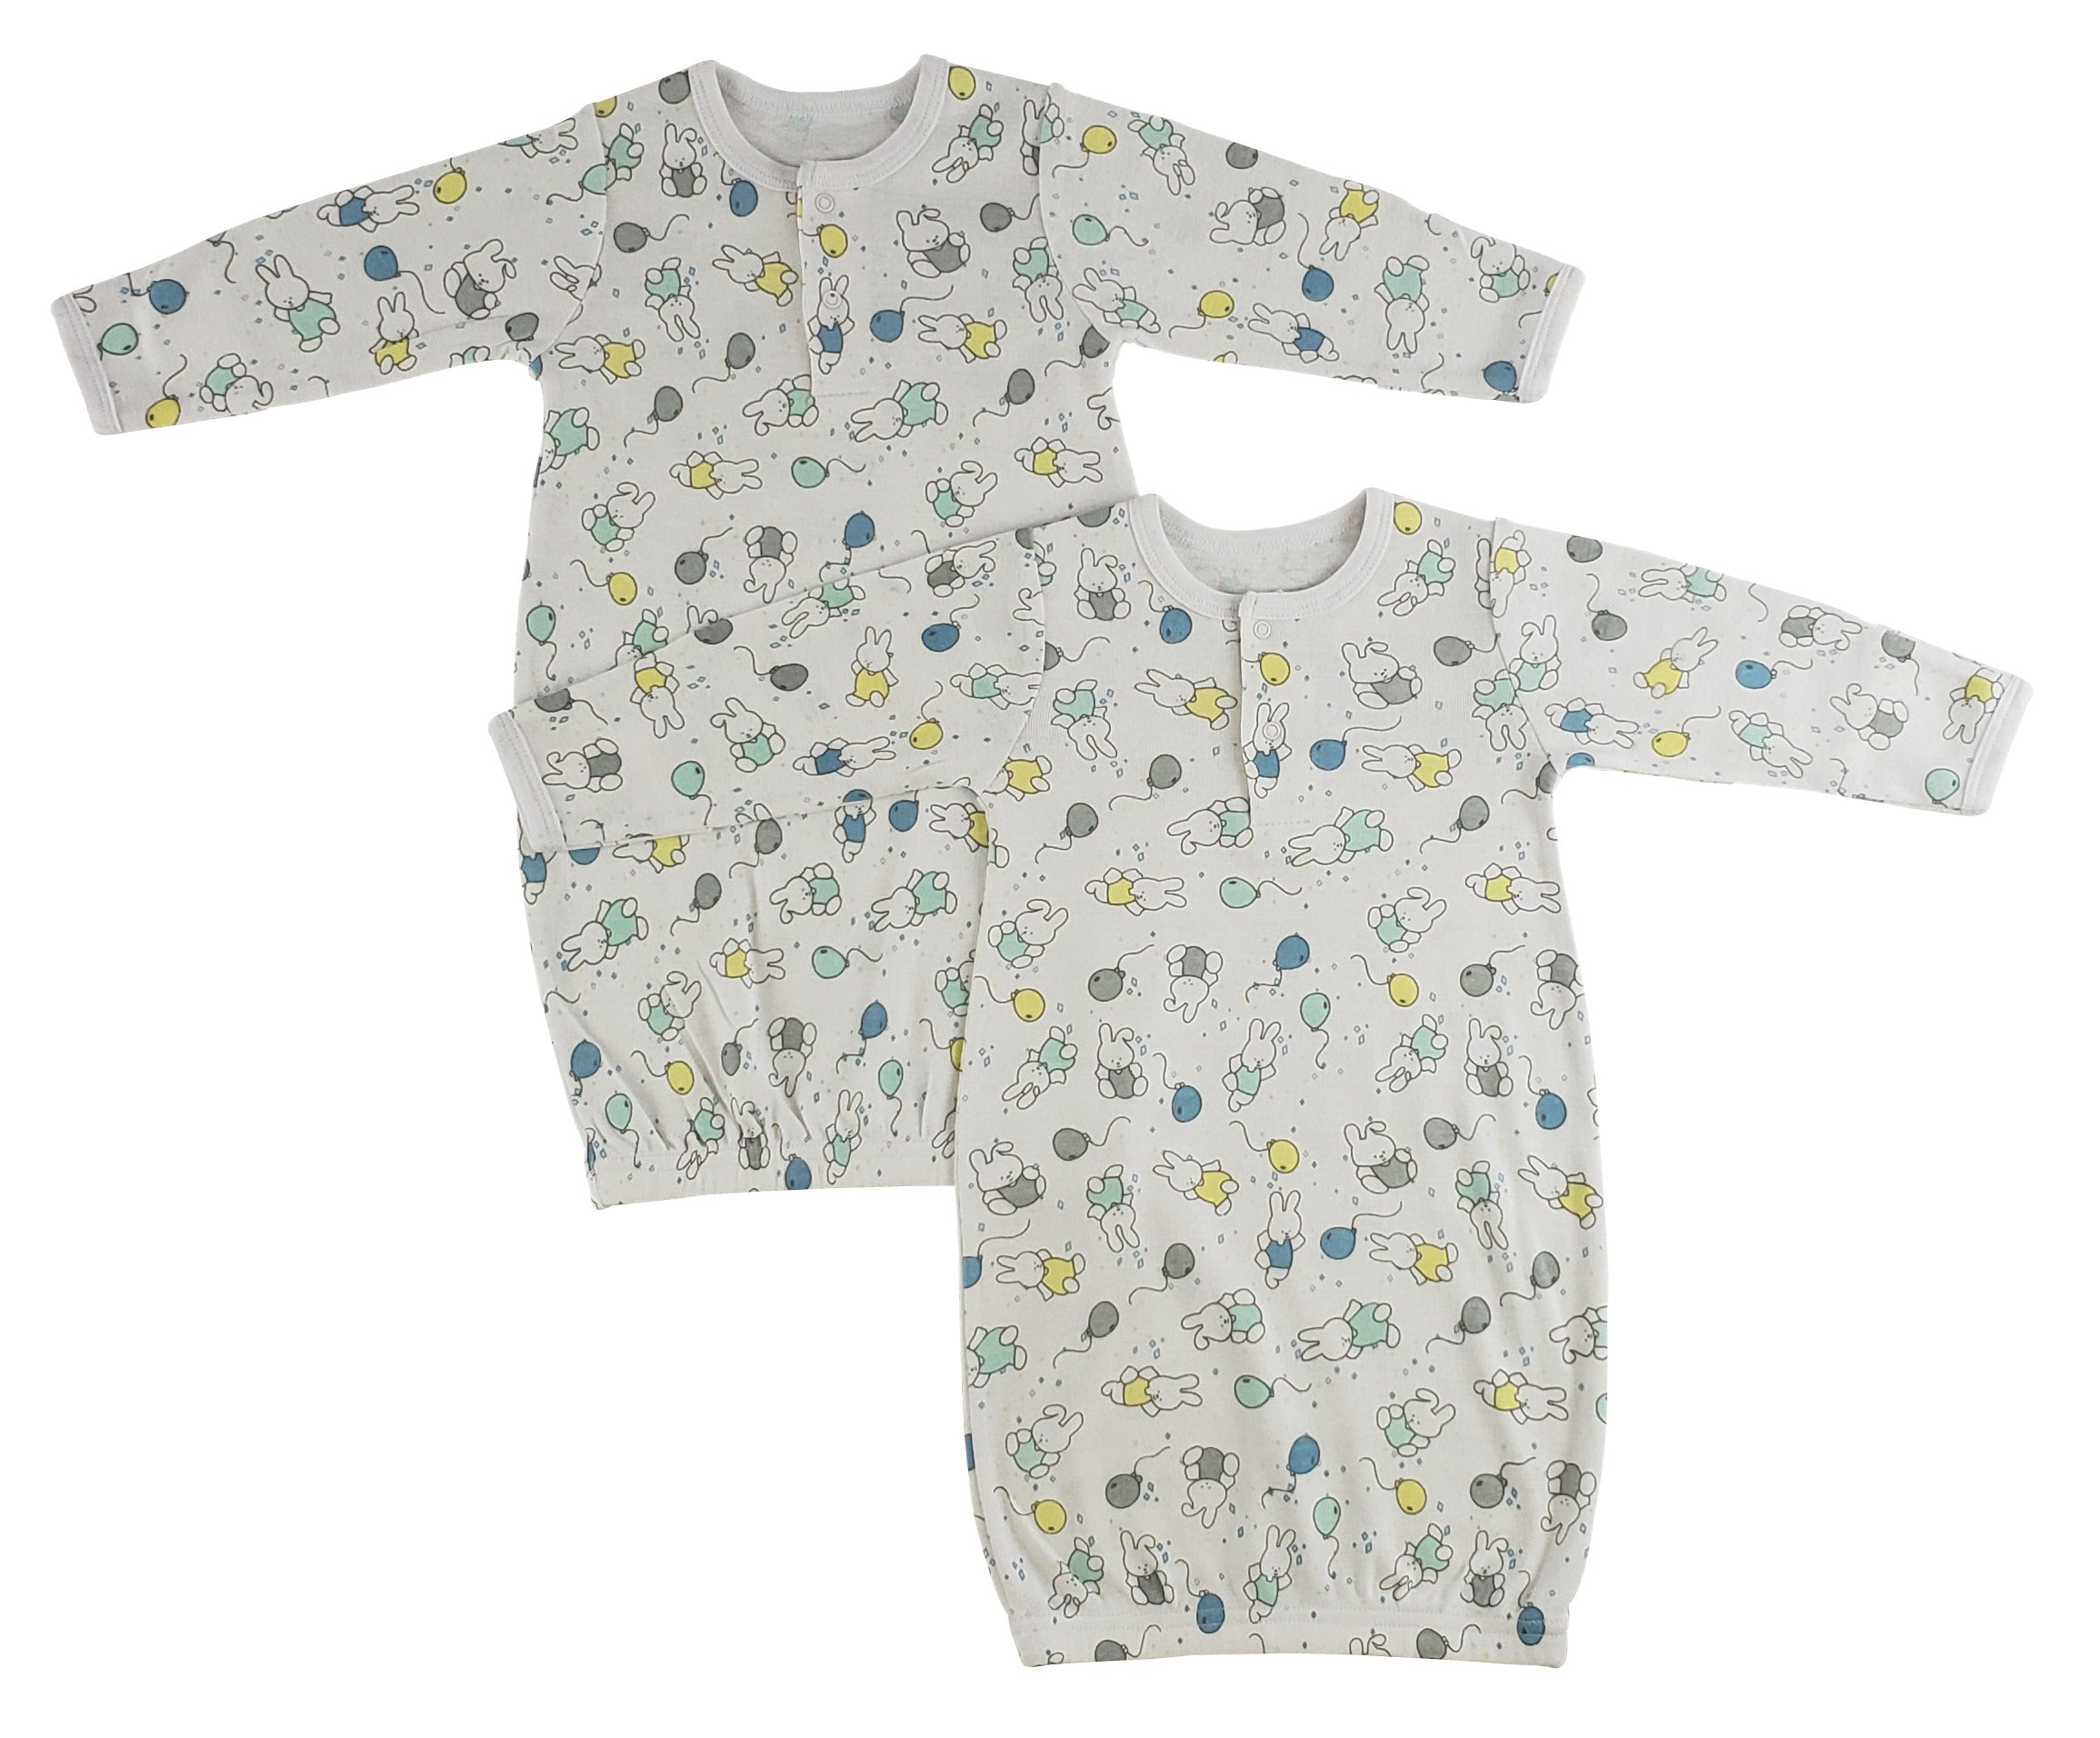 Infant Gowns - 2 Pack GreatEagleInc